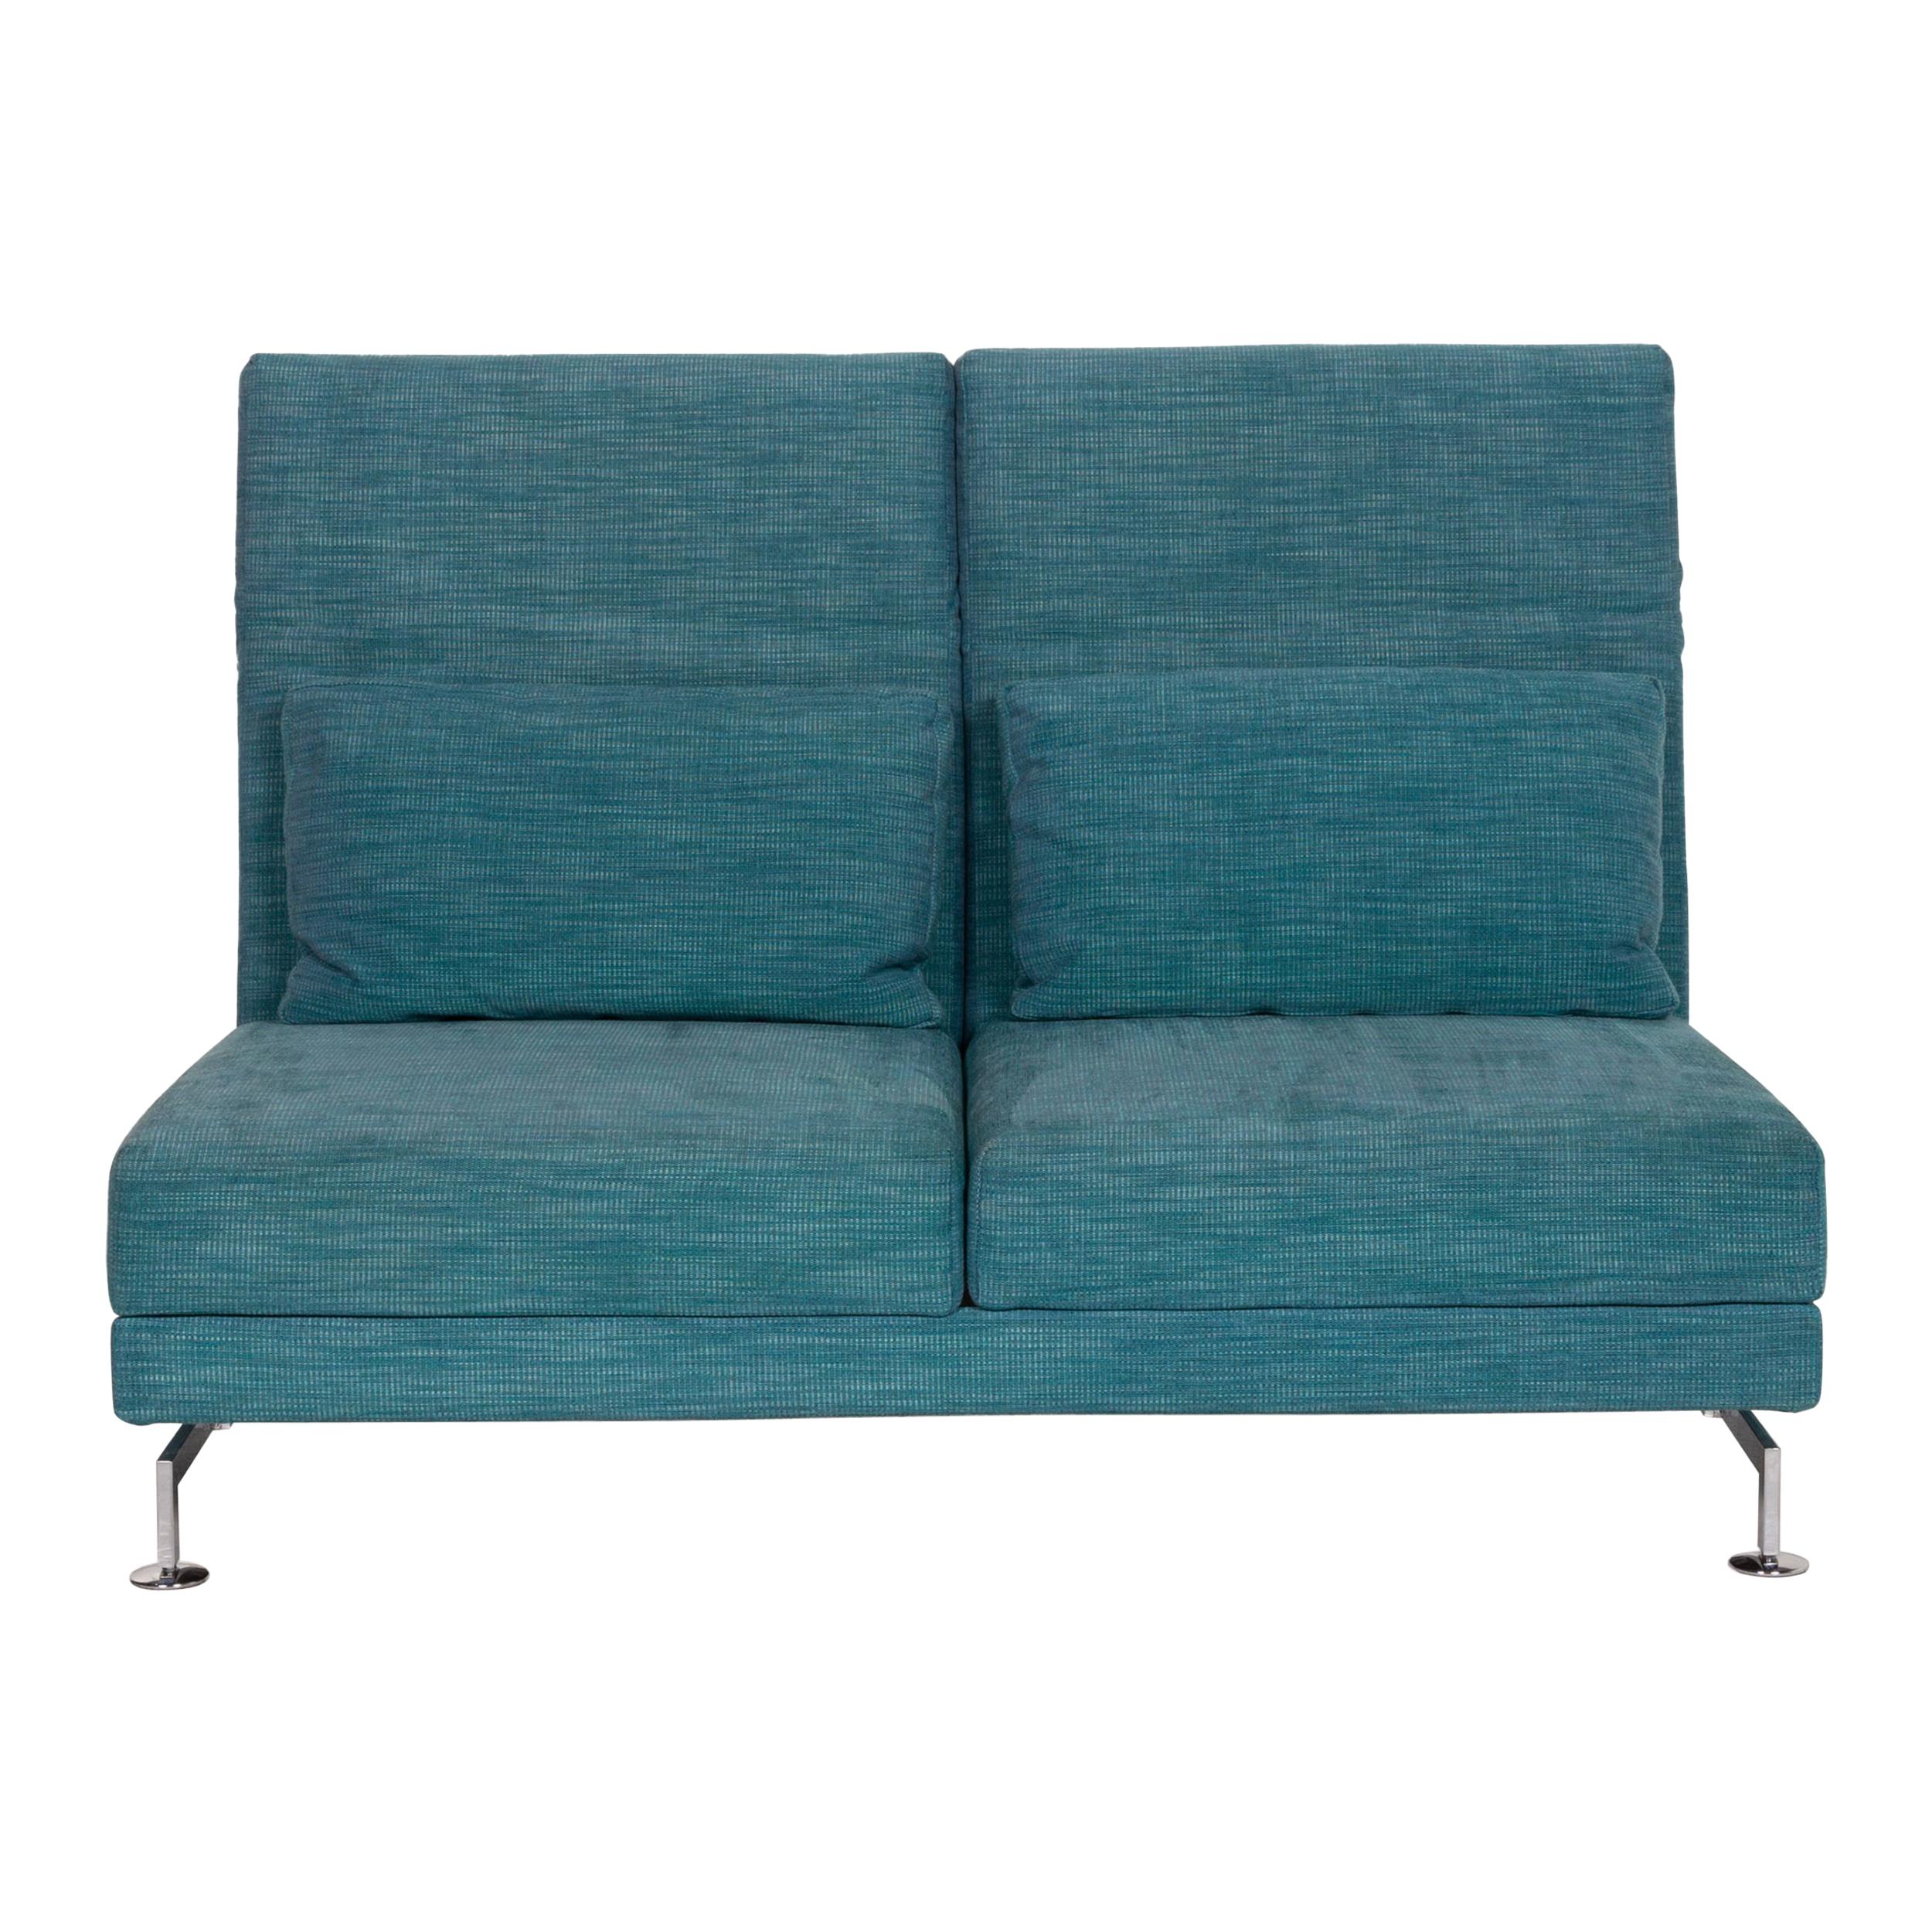 Brühl & Sippold Moule Fabric Sofa Blue Two-Seater Reclining Function Turquoise For Sale